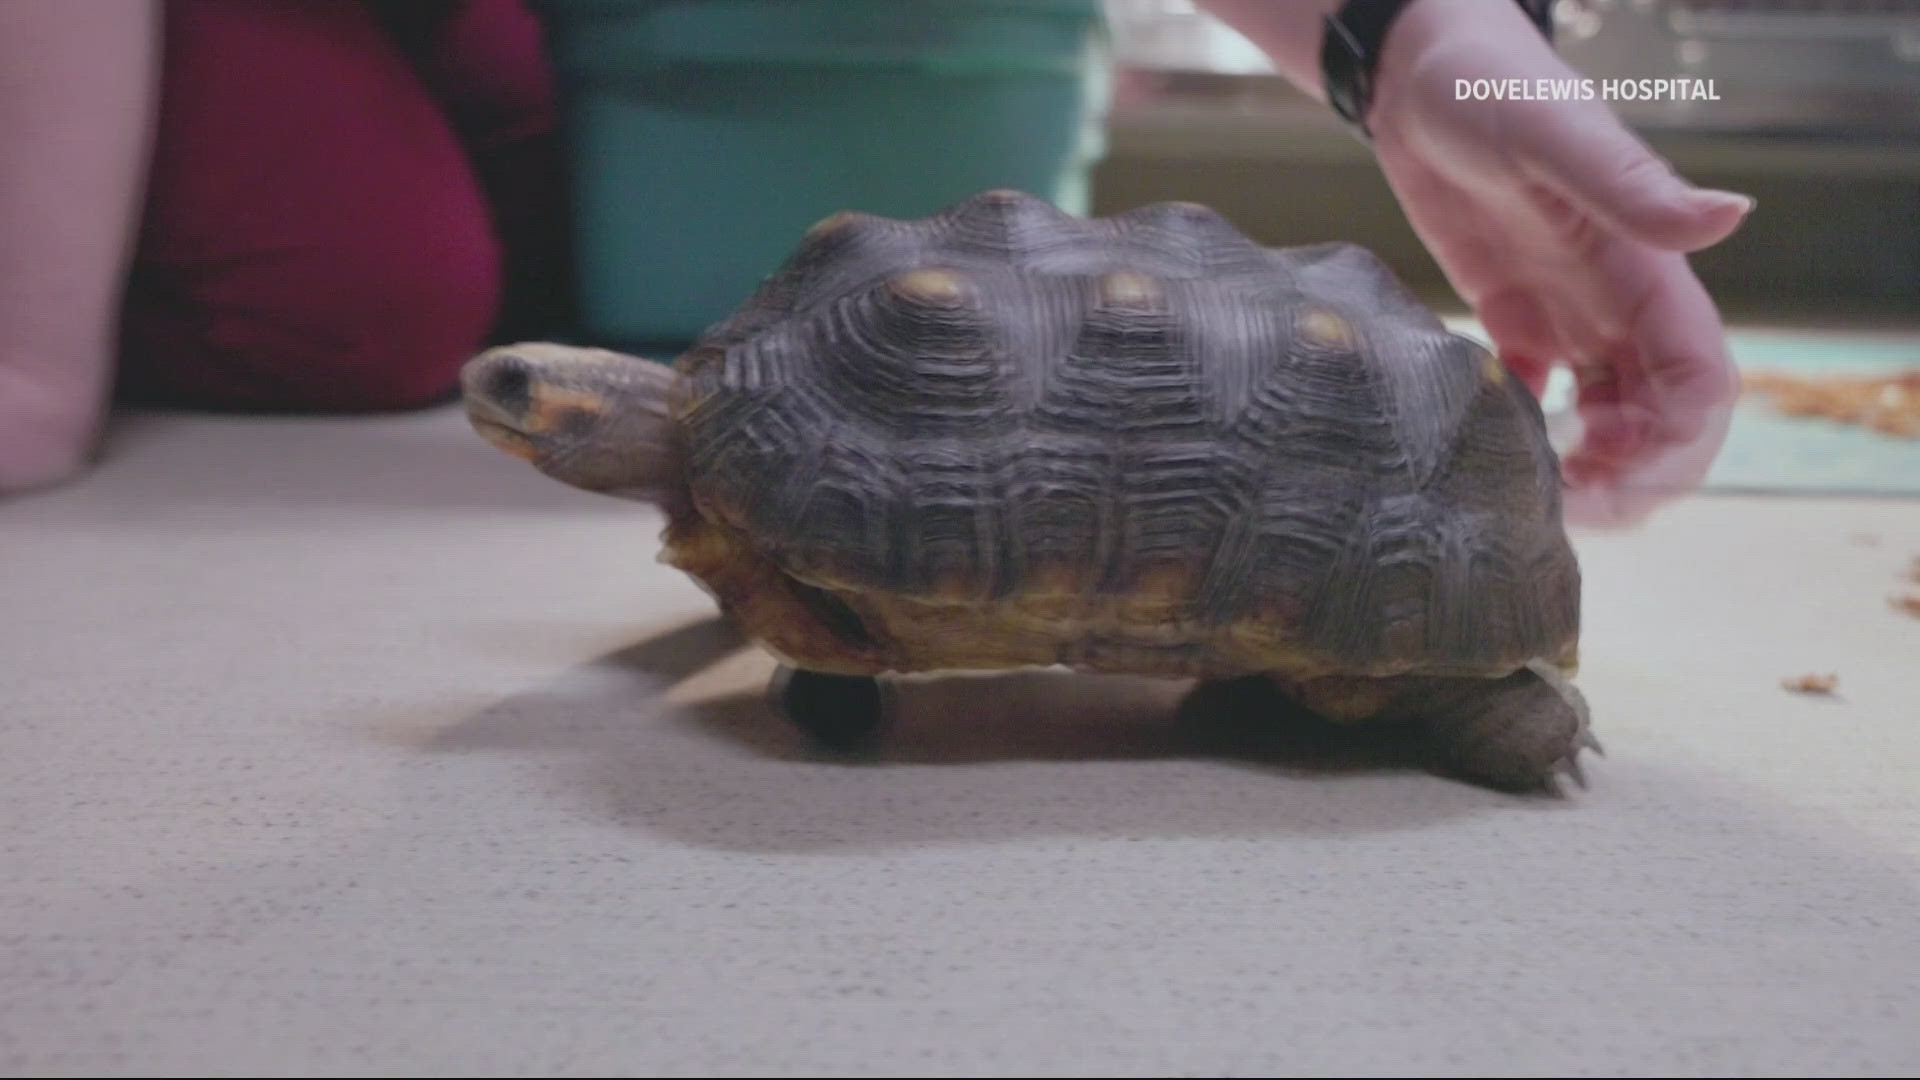 A tortoise named “Cookie” is back on the move after receiving a 3D prosthetic wheel from a veterinarian at Dove Lewis Animal Hospital after its leg was amputated.